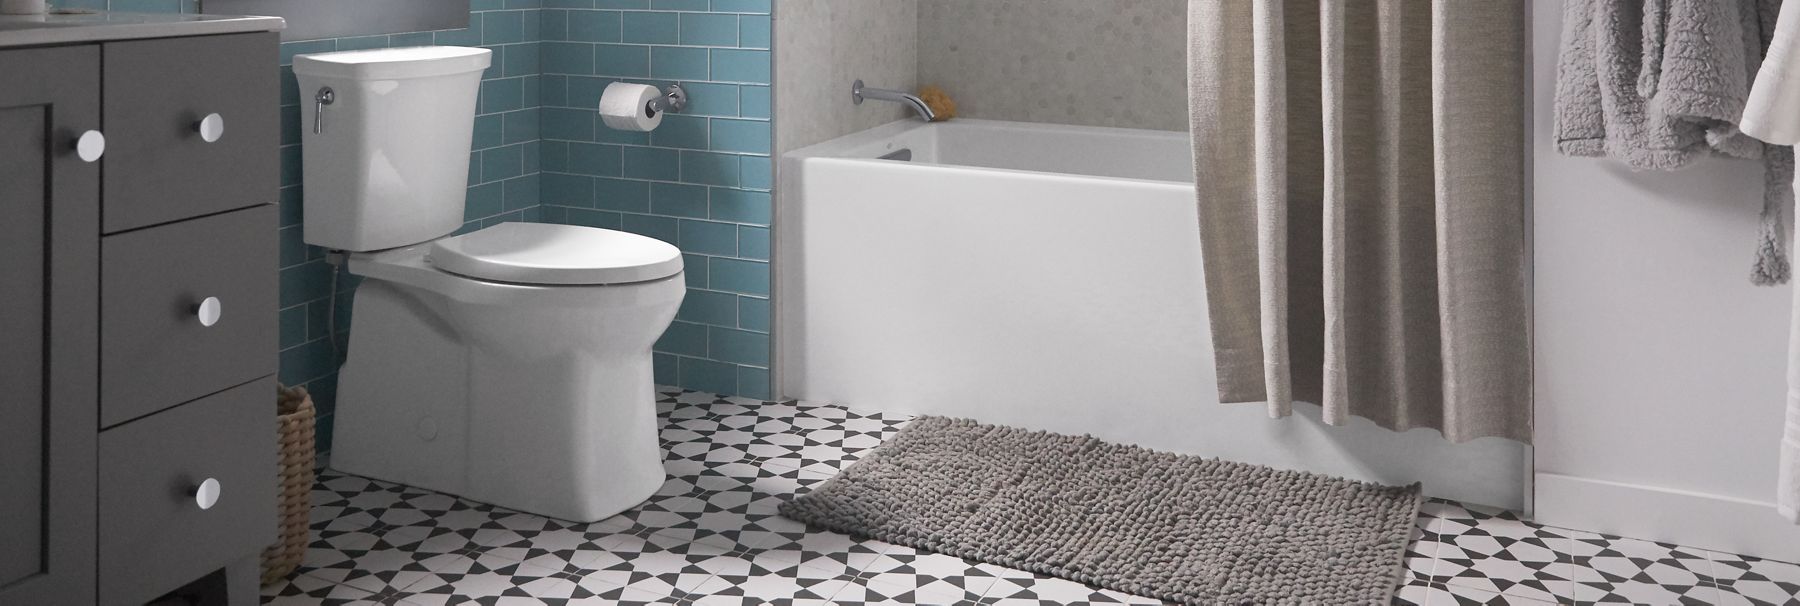 Kohler Toilets Showers Sinks Faucets And More For Bathroom